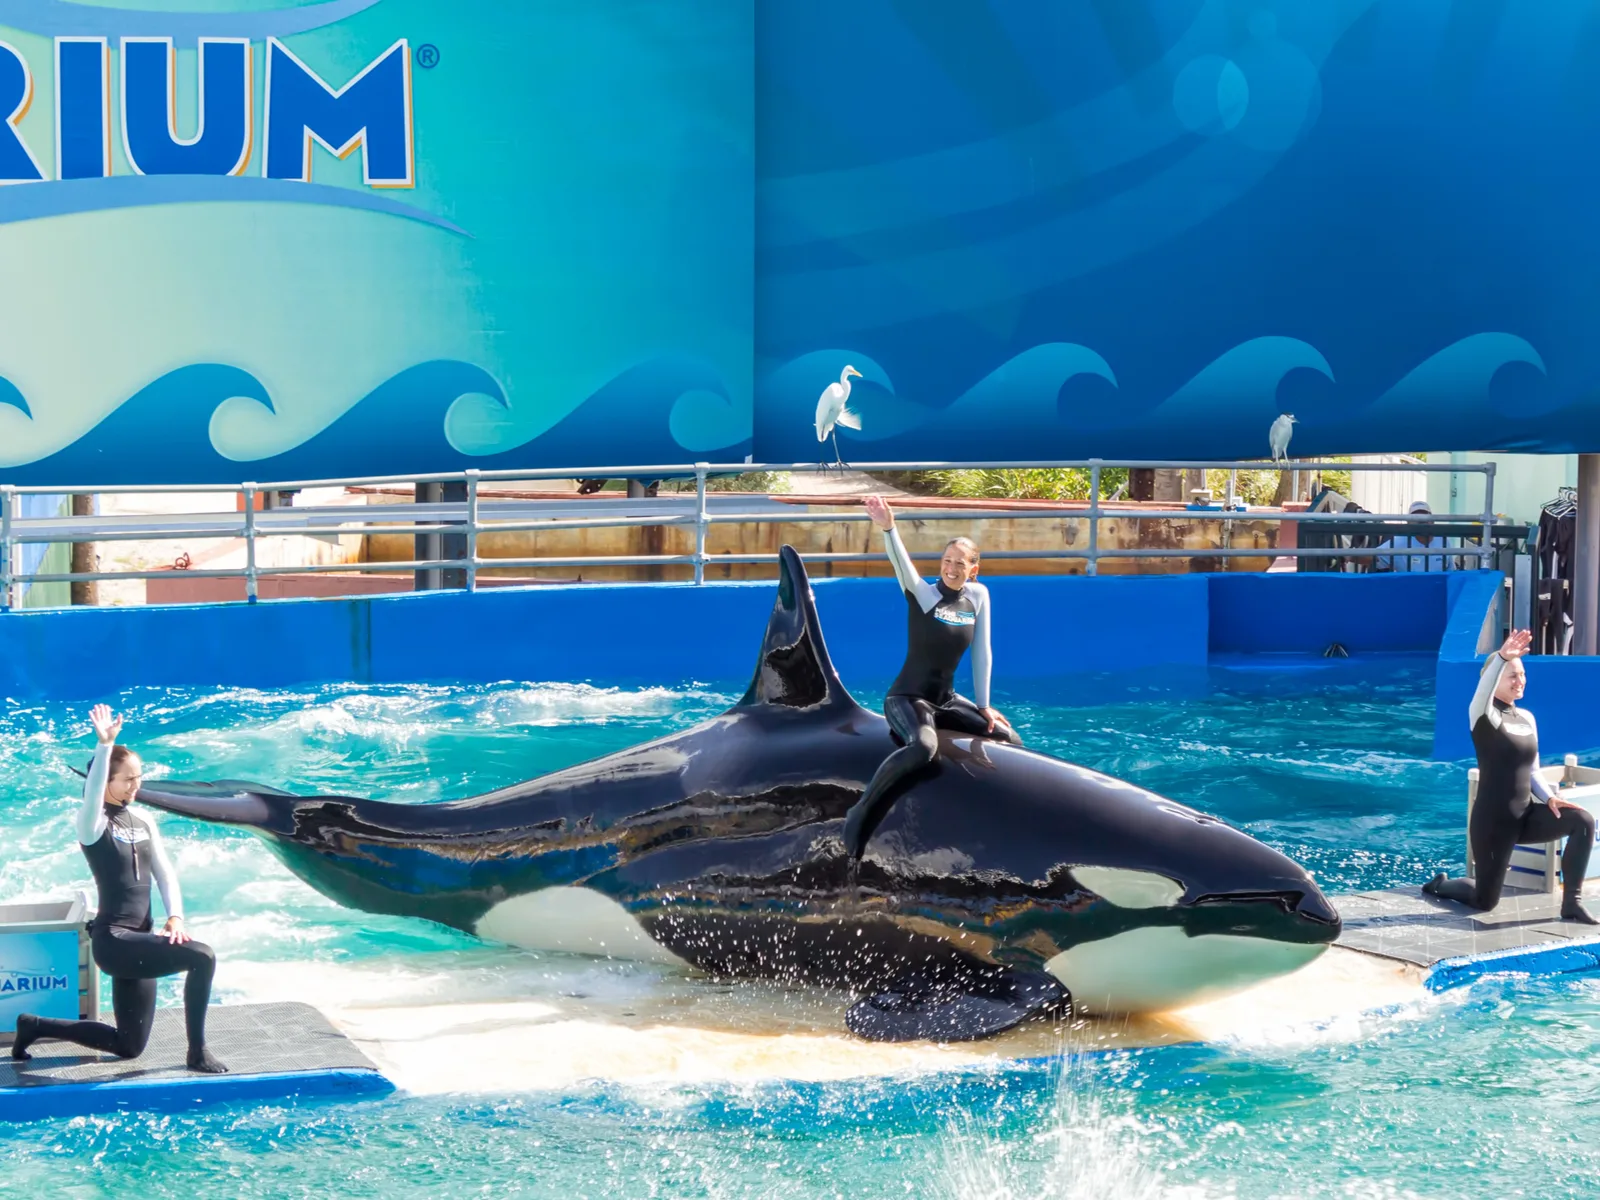 Woman riding a killer whale in the Miami seaquarium, one of the best things to do in Miami